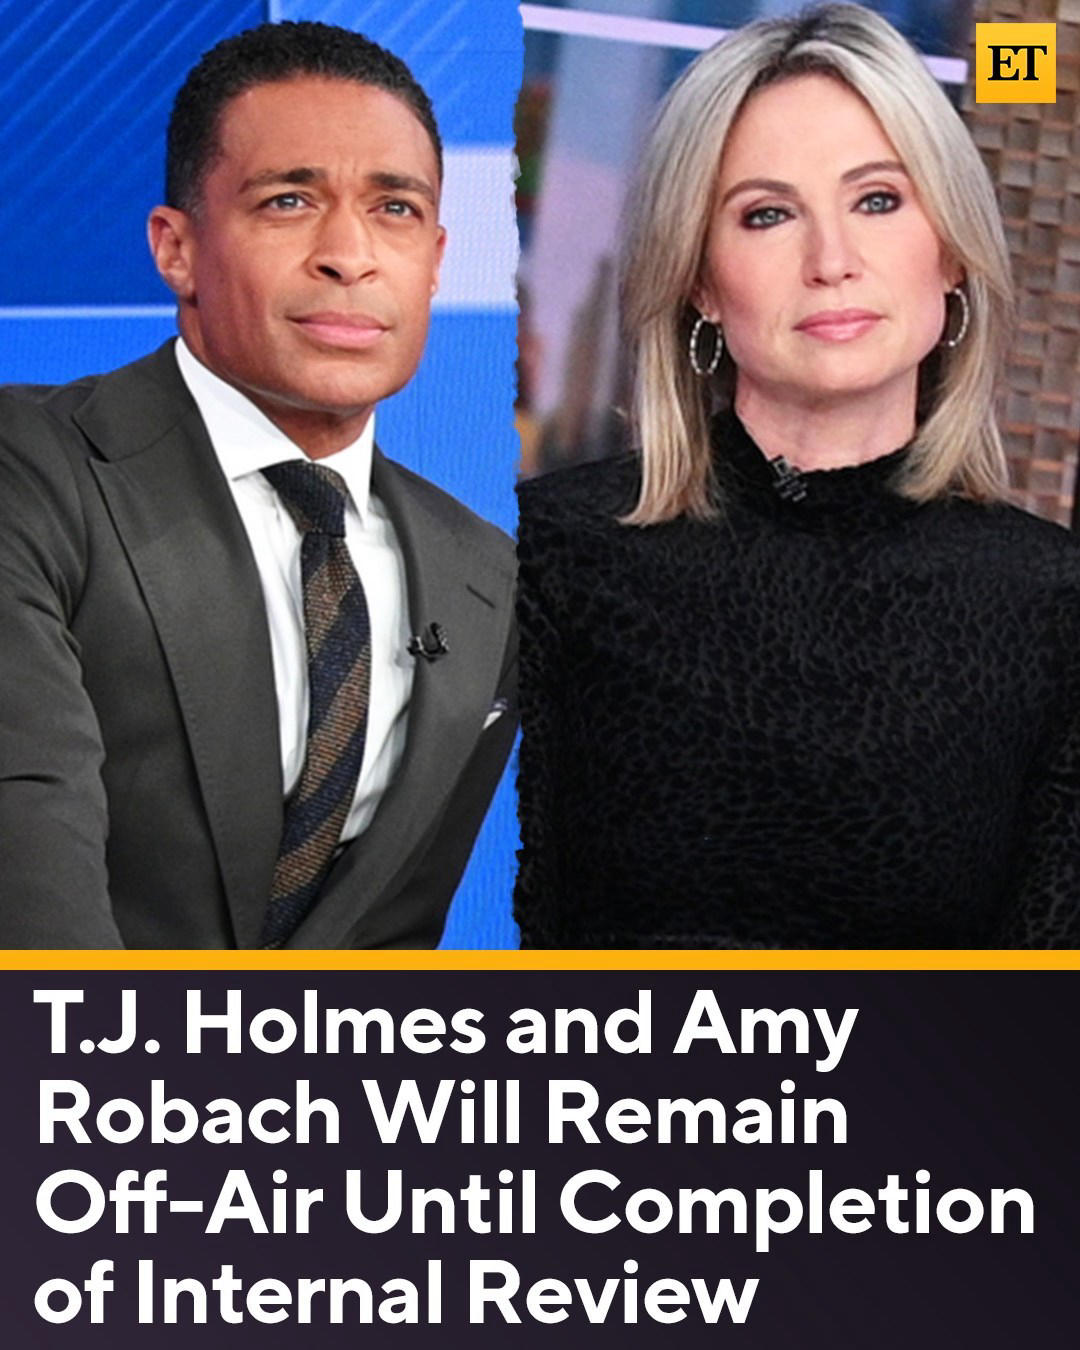 Entertainment Tonight - Don't expect to see Amy Robach and T